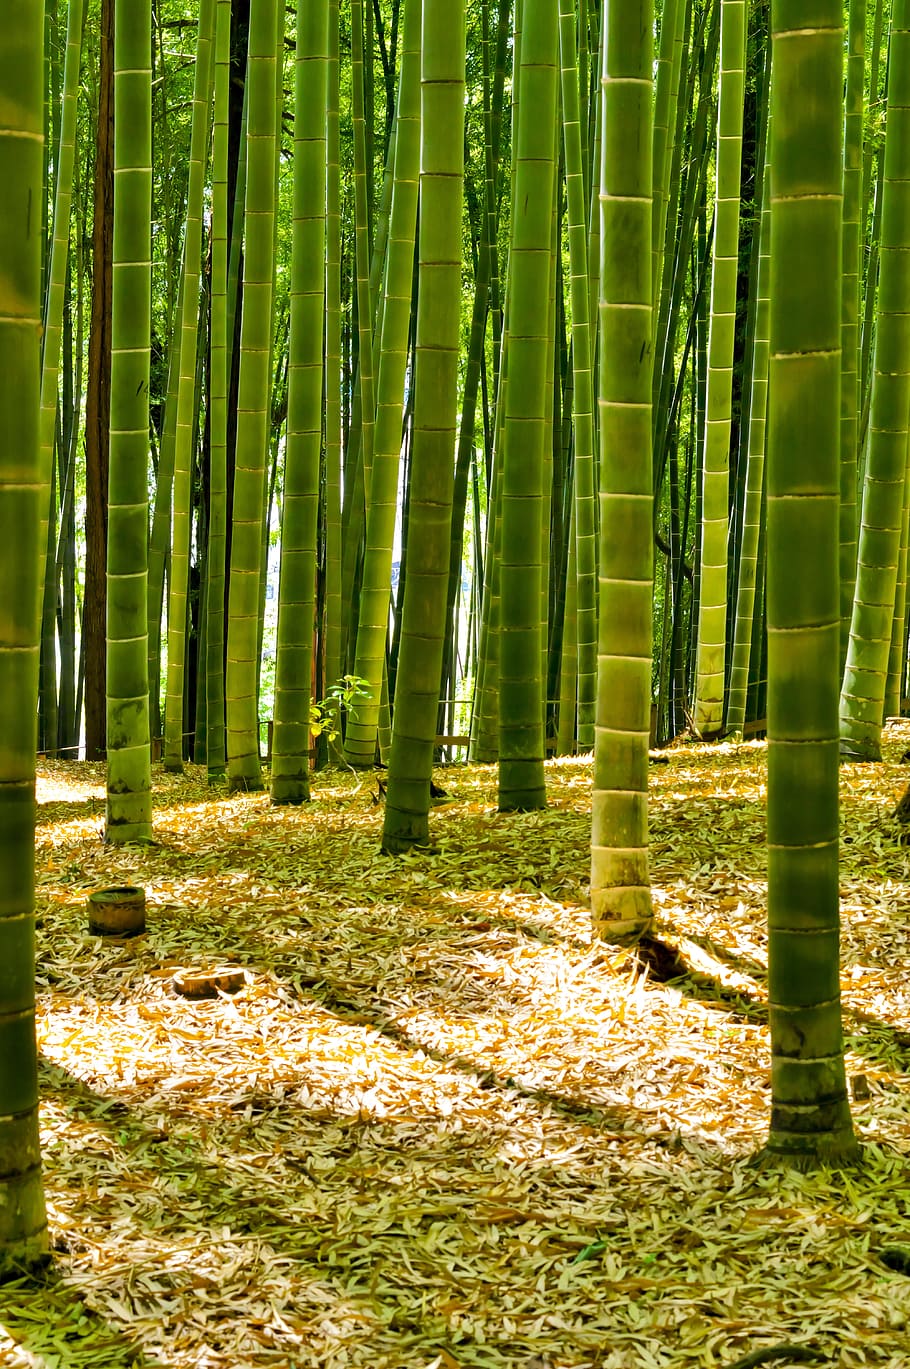 green bamboo trees, Japan, Bamboo, Forest, bamboo forest, green, natural, landscape, plant, sayama hill